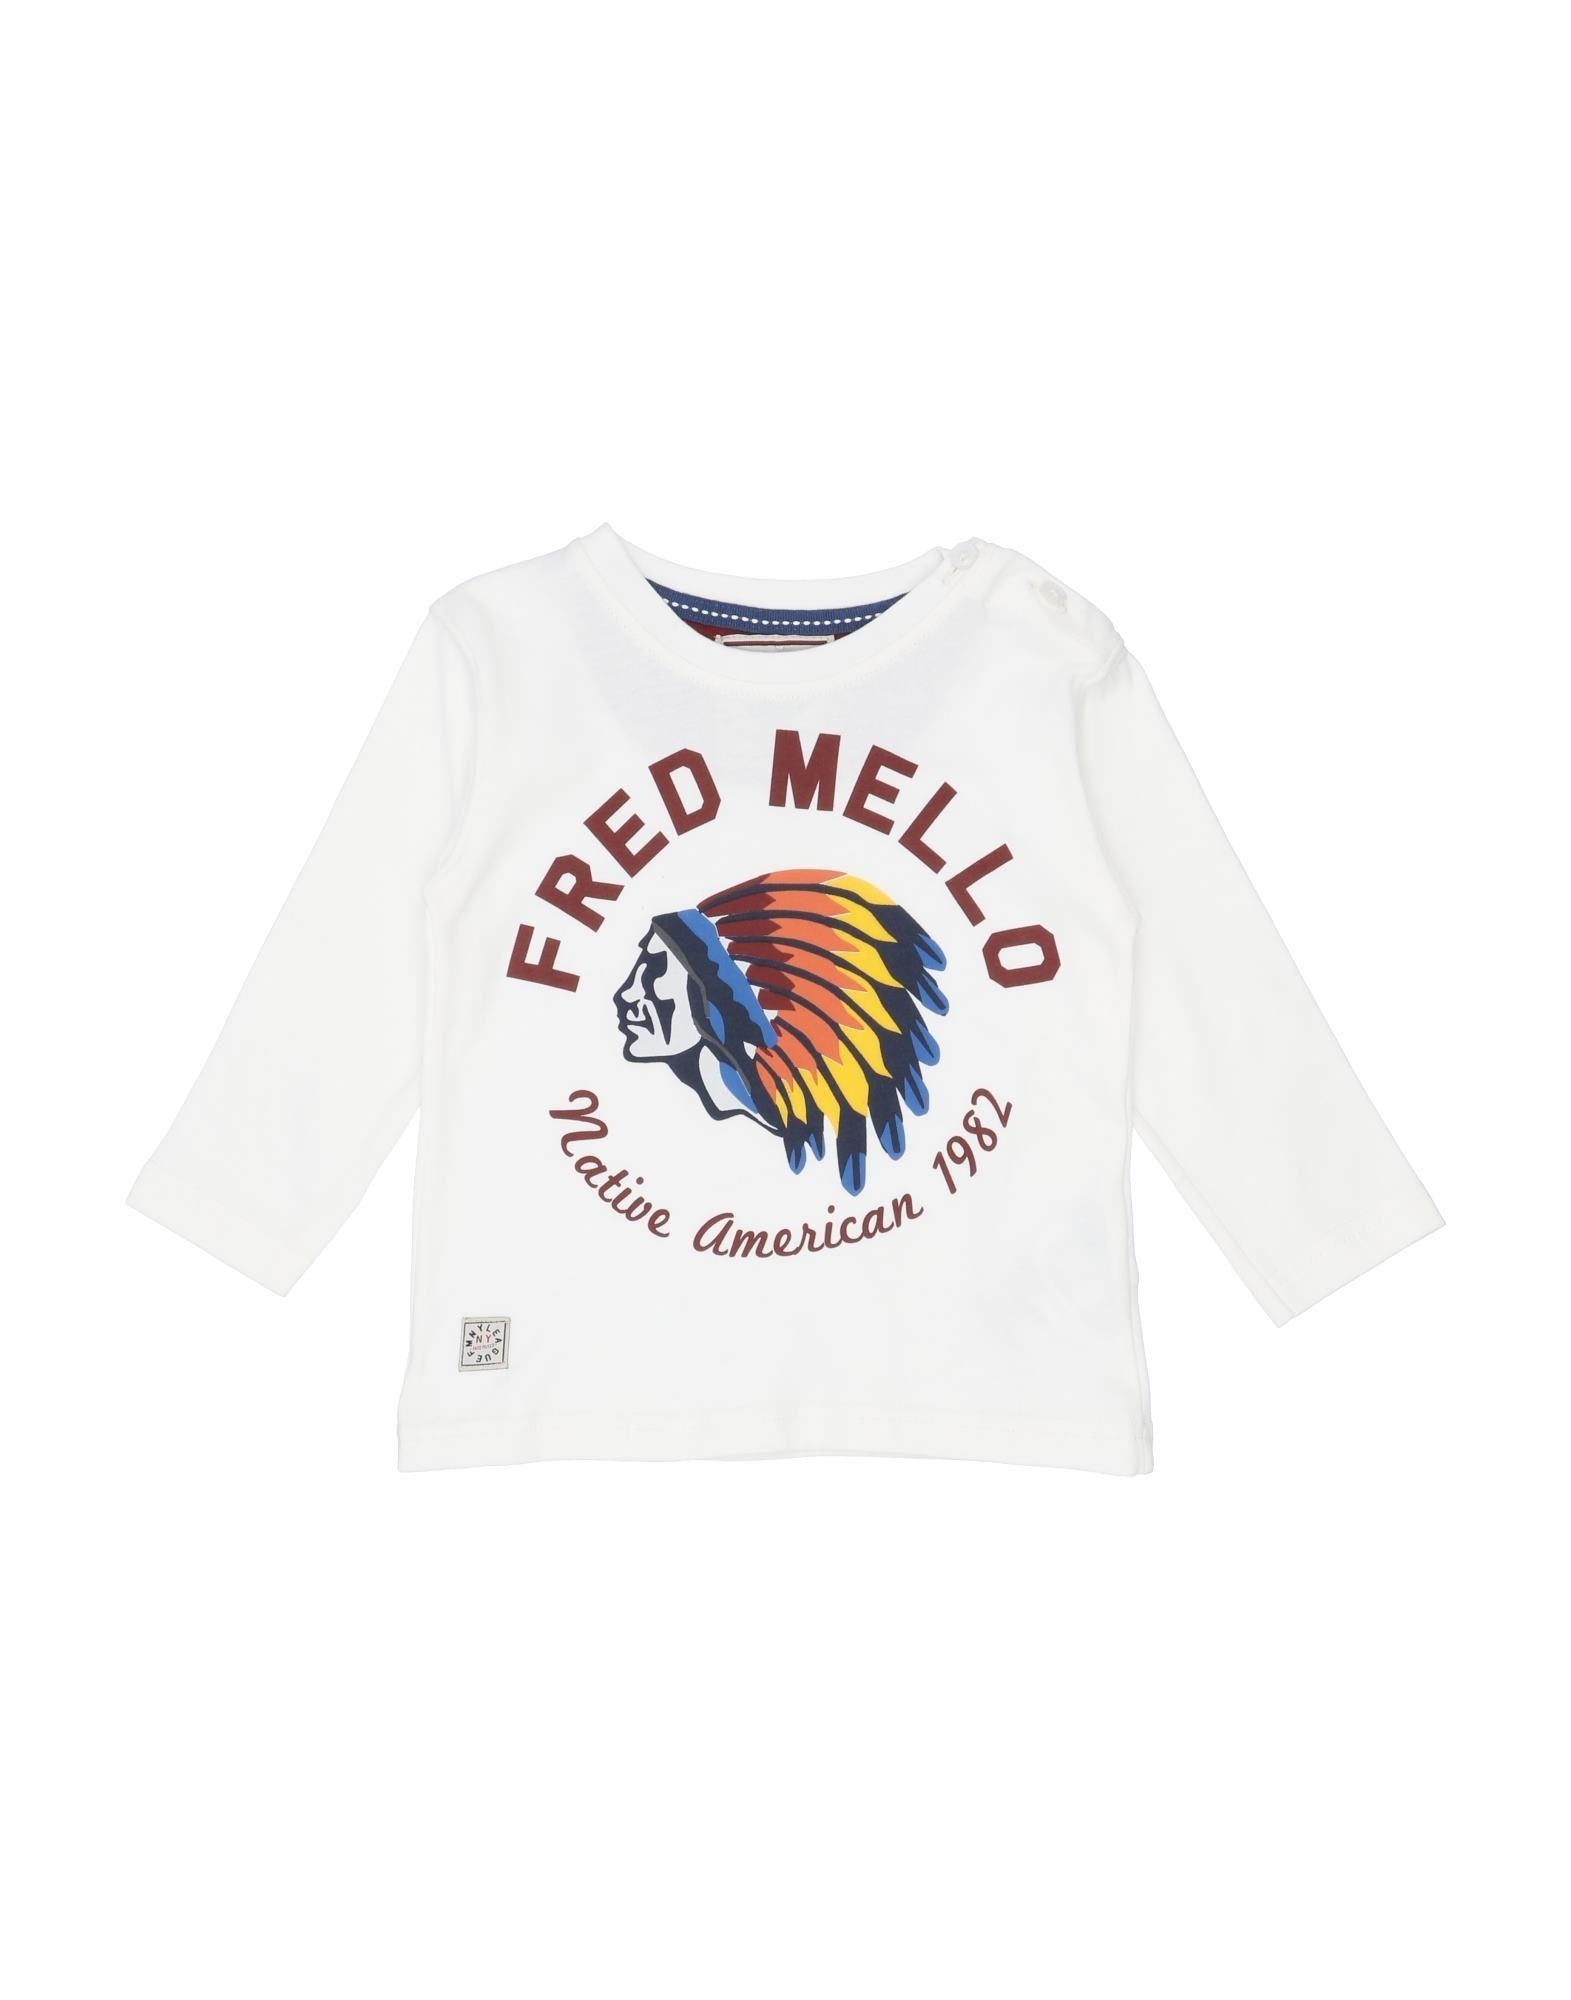 Fred Mello Kids' T-shirts In White